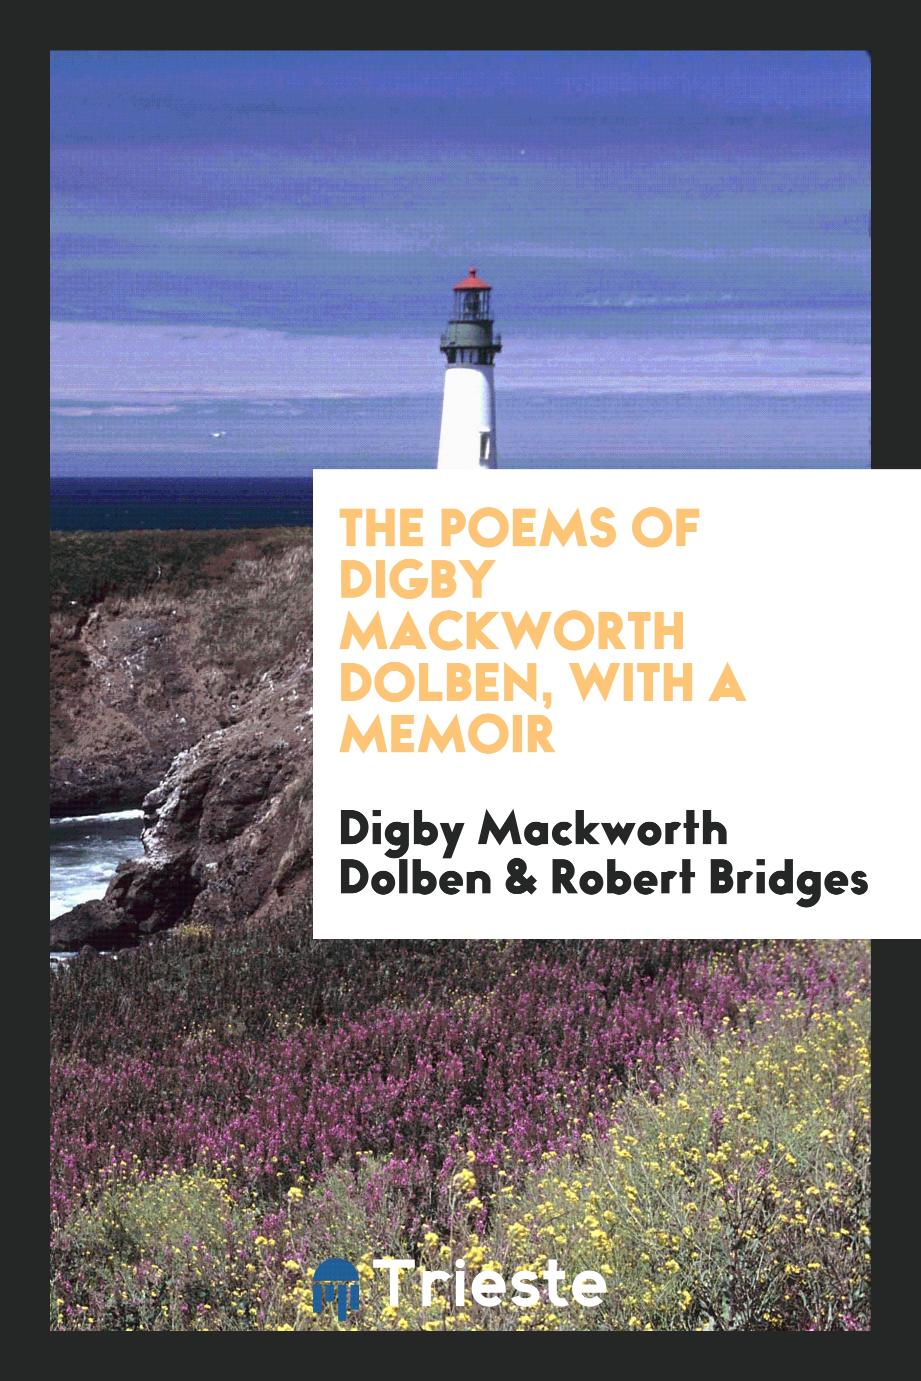 The poems of Digby Mackworth Dolben, with a memoir